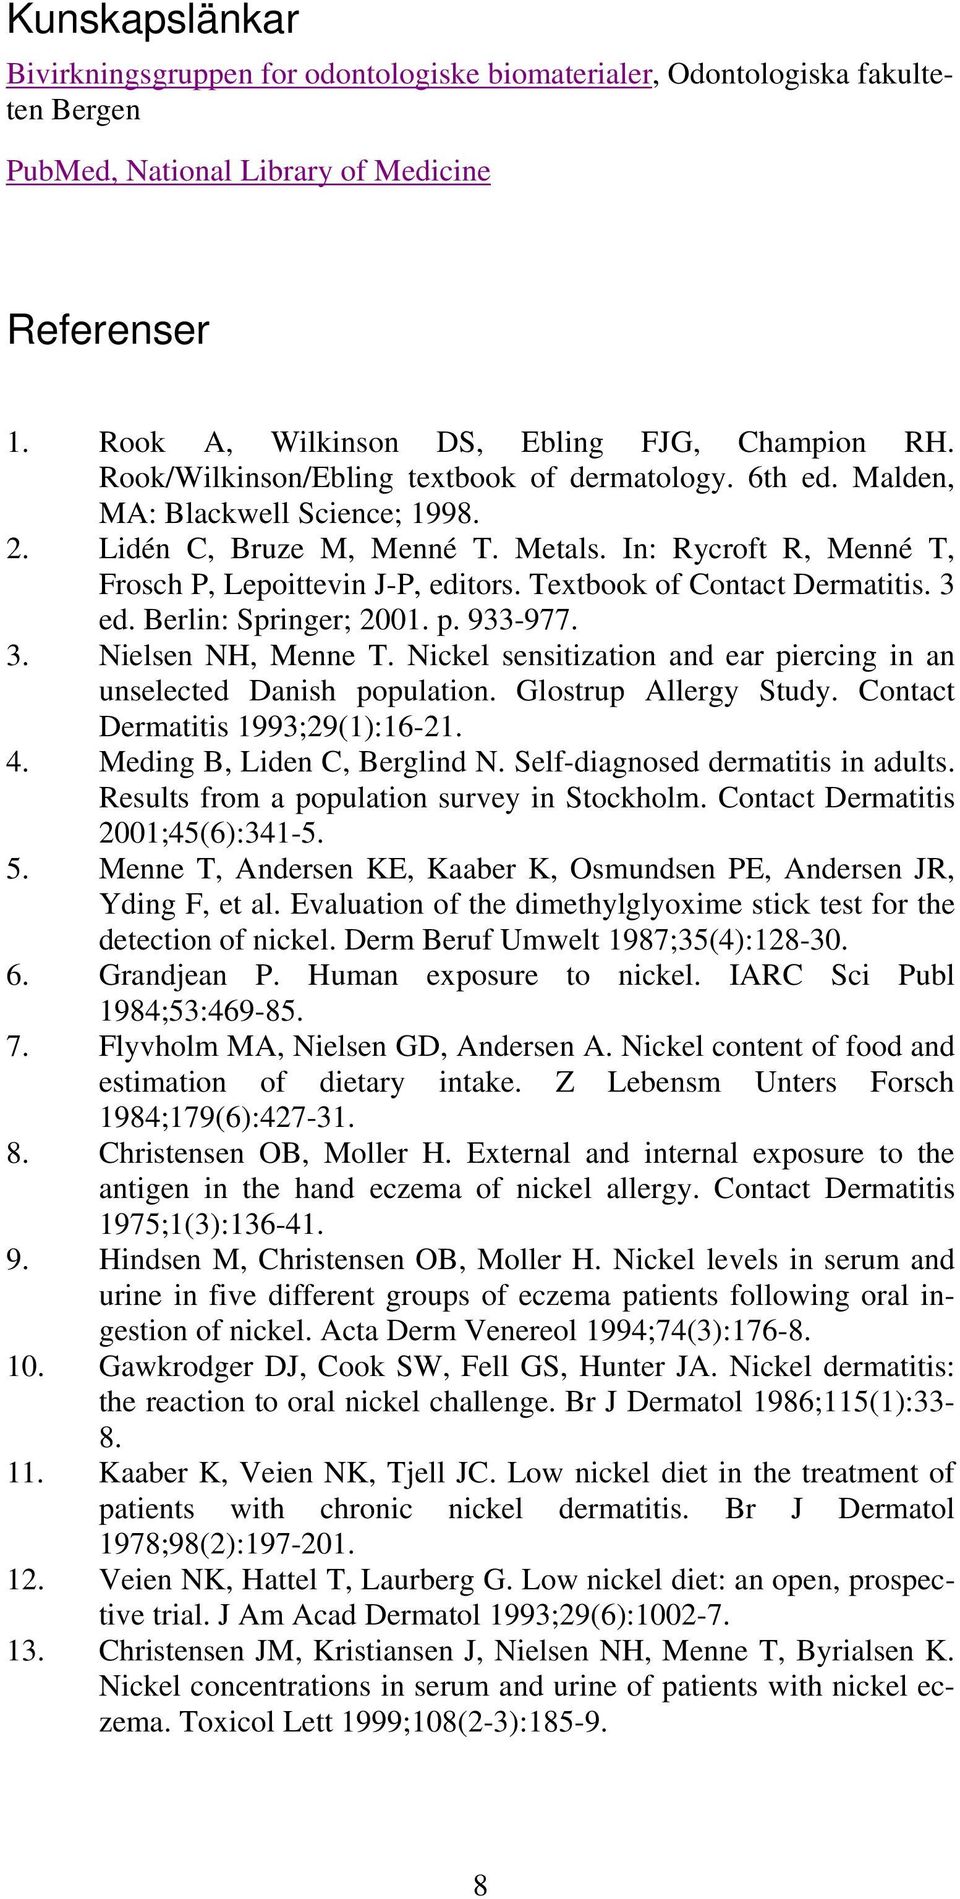 Textbook of Contact Dermatitis. 3 ed. Berlin: Springer; 2001. p. 933-977. 3. Nielsen NH, Menne T. Nickel sensitization and ear piercing in an unselected Danish population. Glostrup Allergy Study.